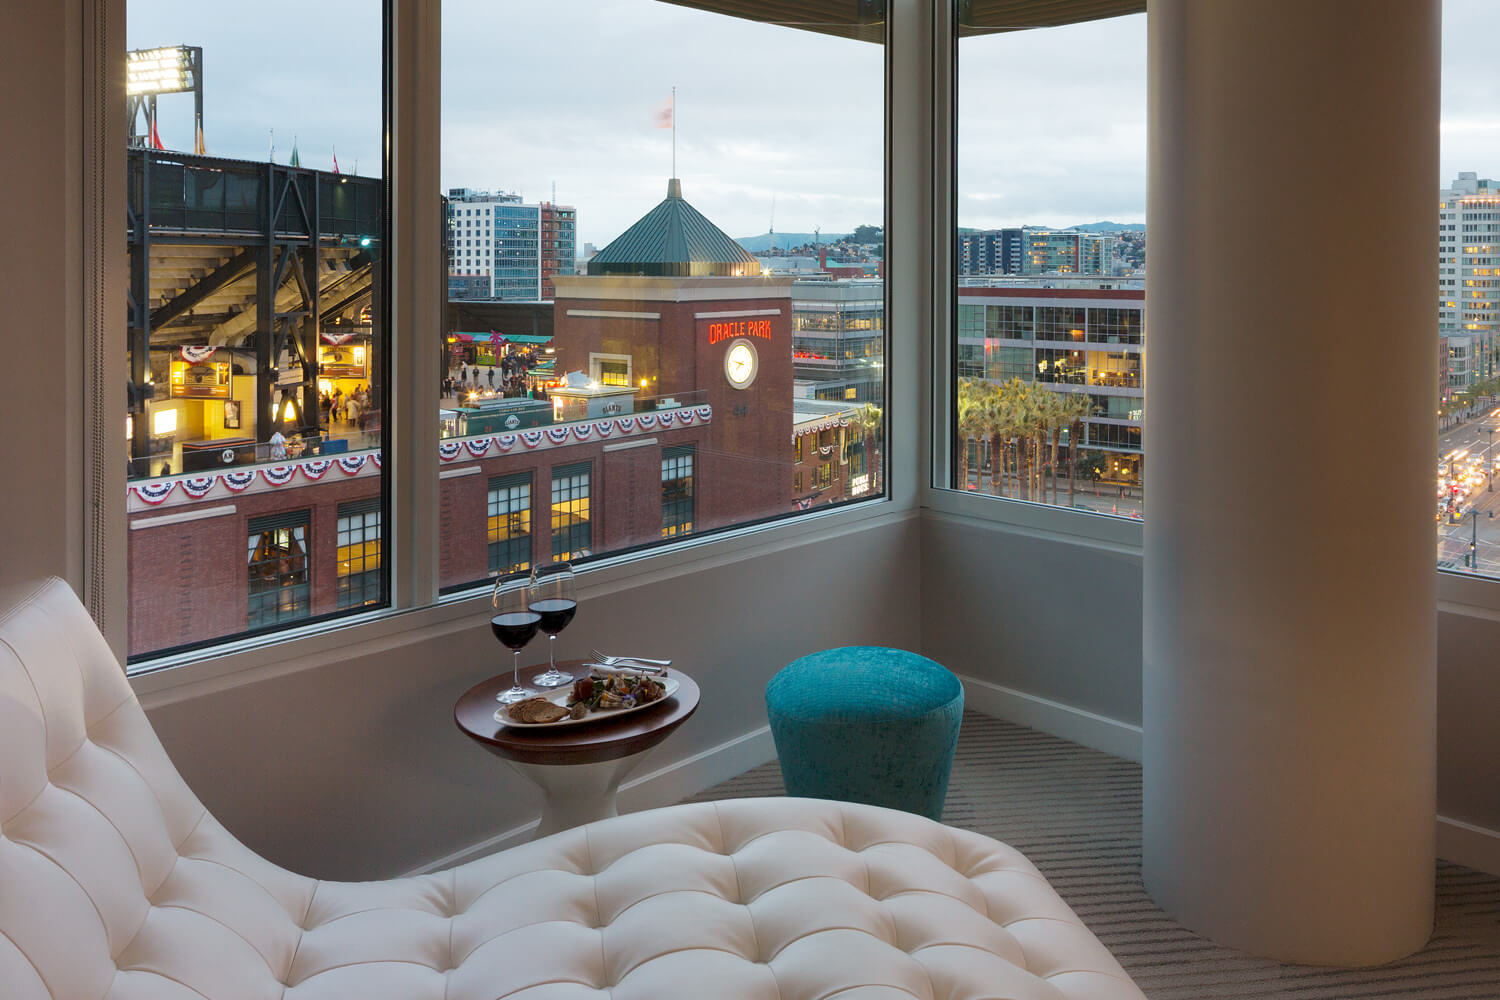 A white chair in a room with a view of a city, located in a hotel near Chase Center.